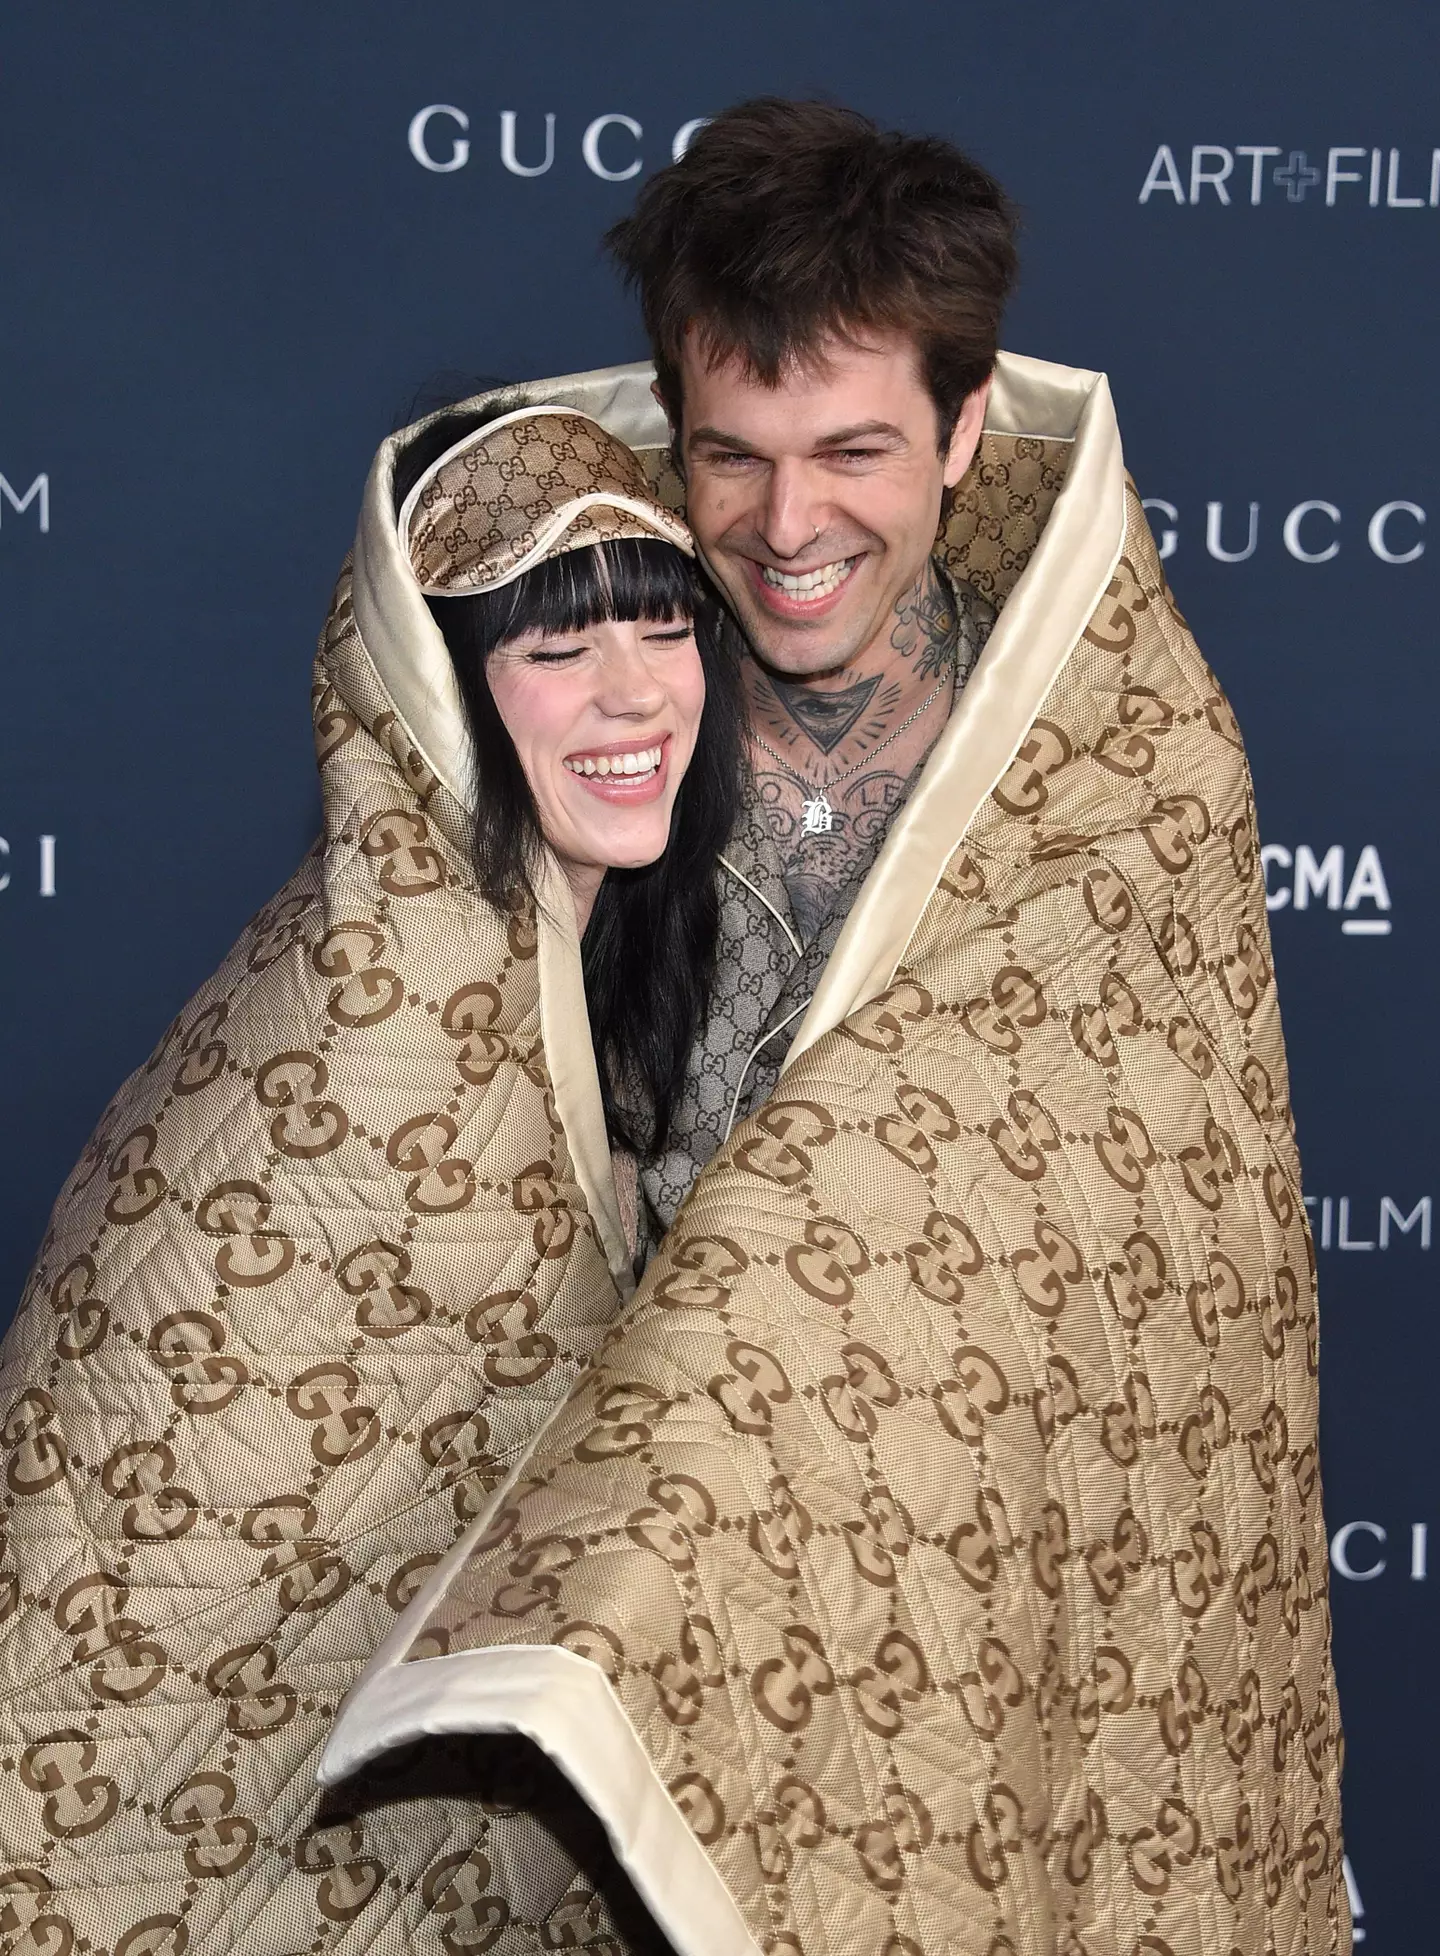 Billie Eilish and Jesse Rutherford were confirmed to be dating back in October.